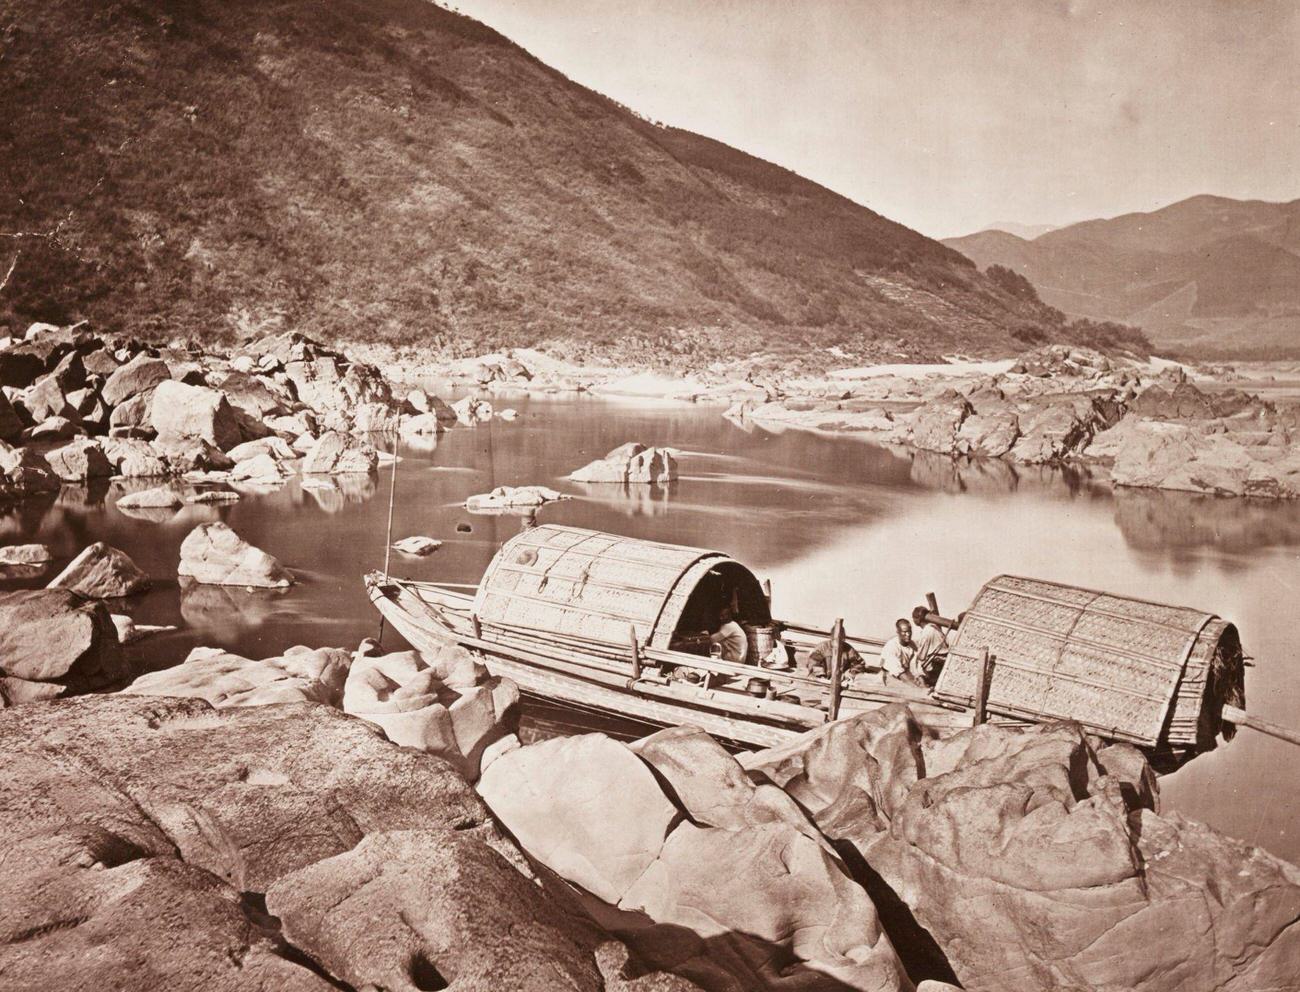 A Rapid Boat, 1871